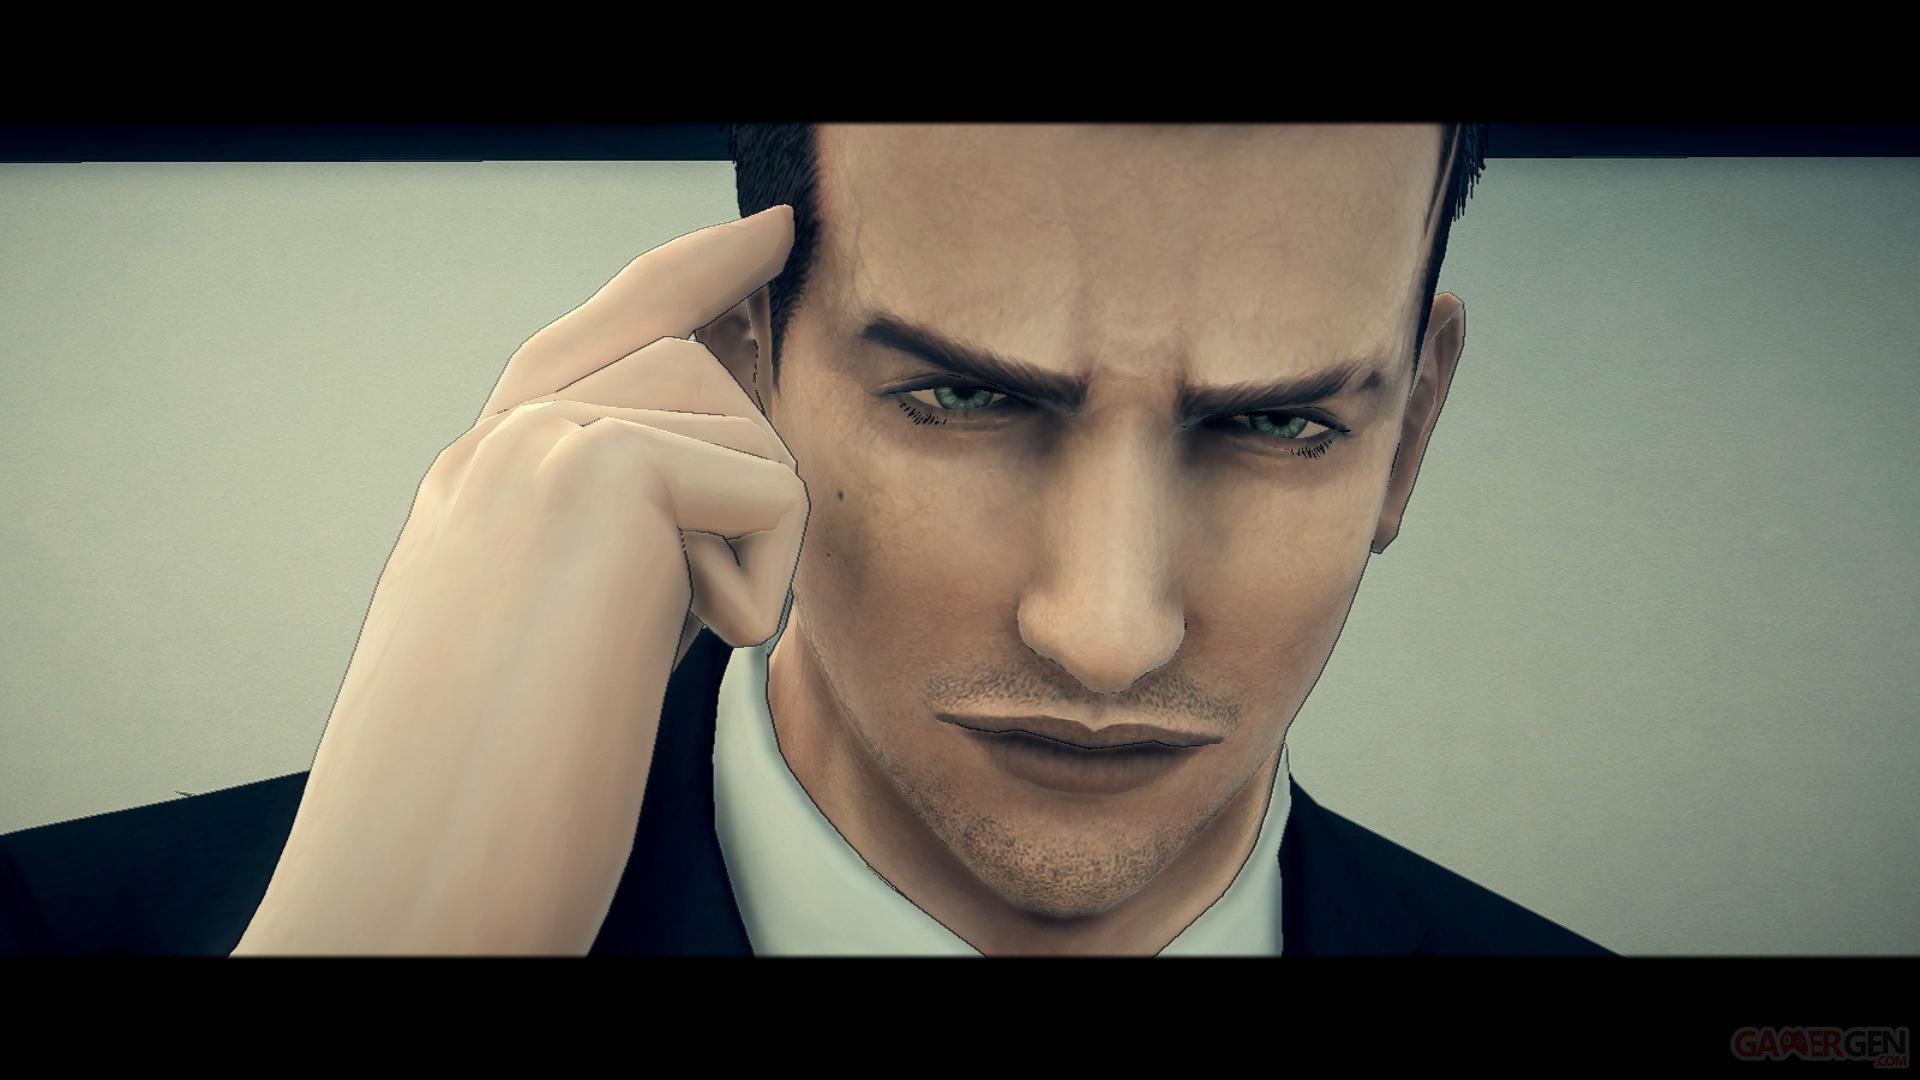 download deadly premonition 2 a blessing in disguise review for free